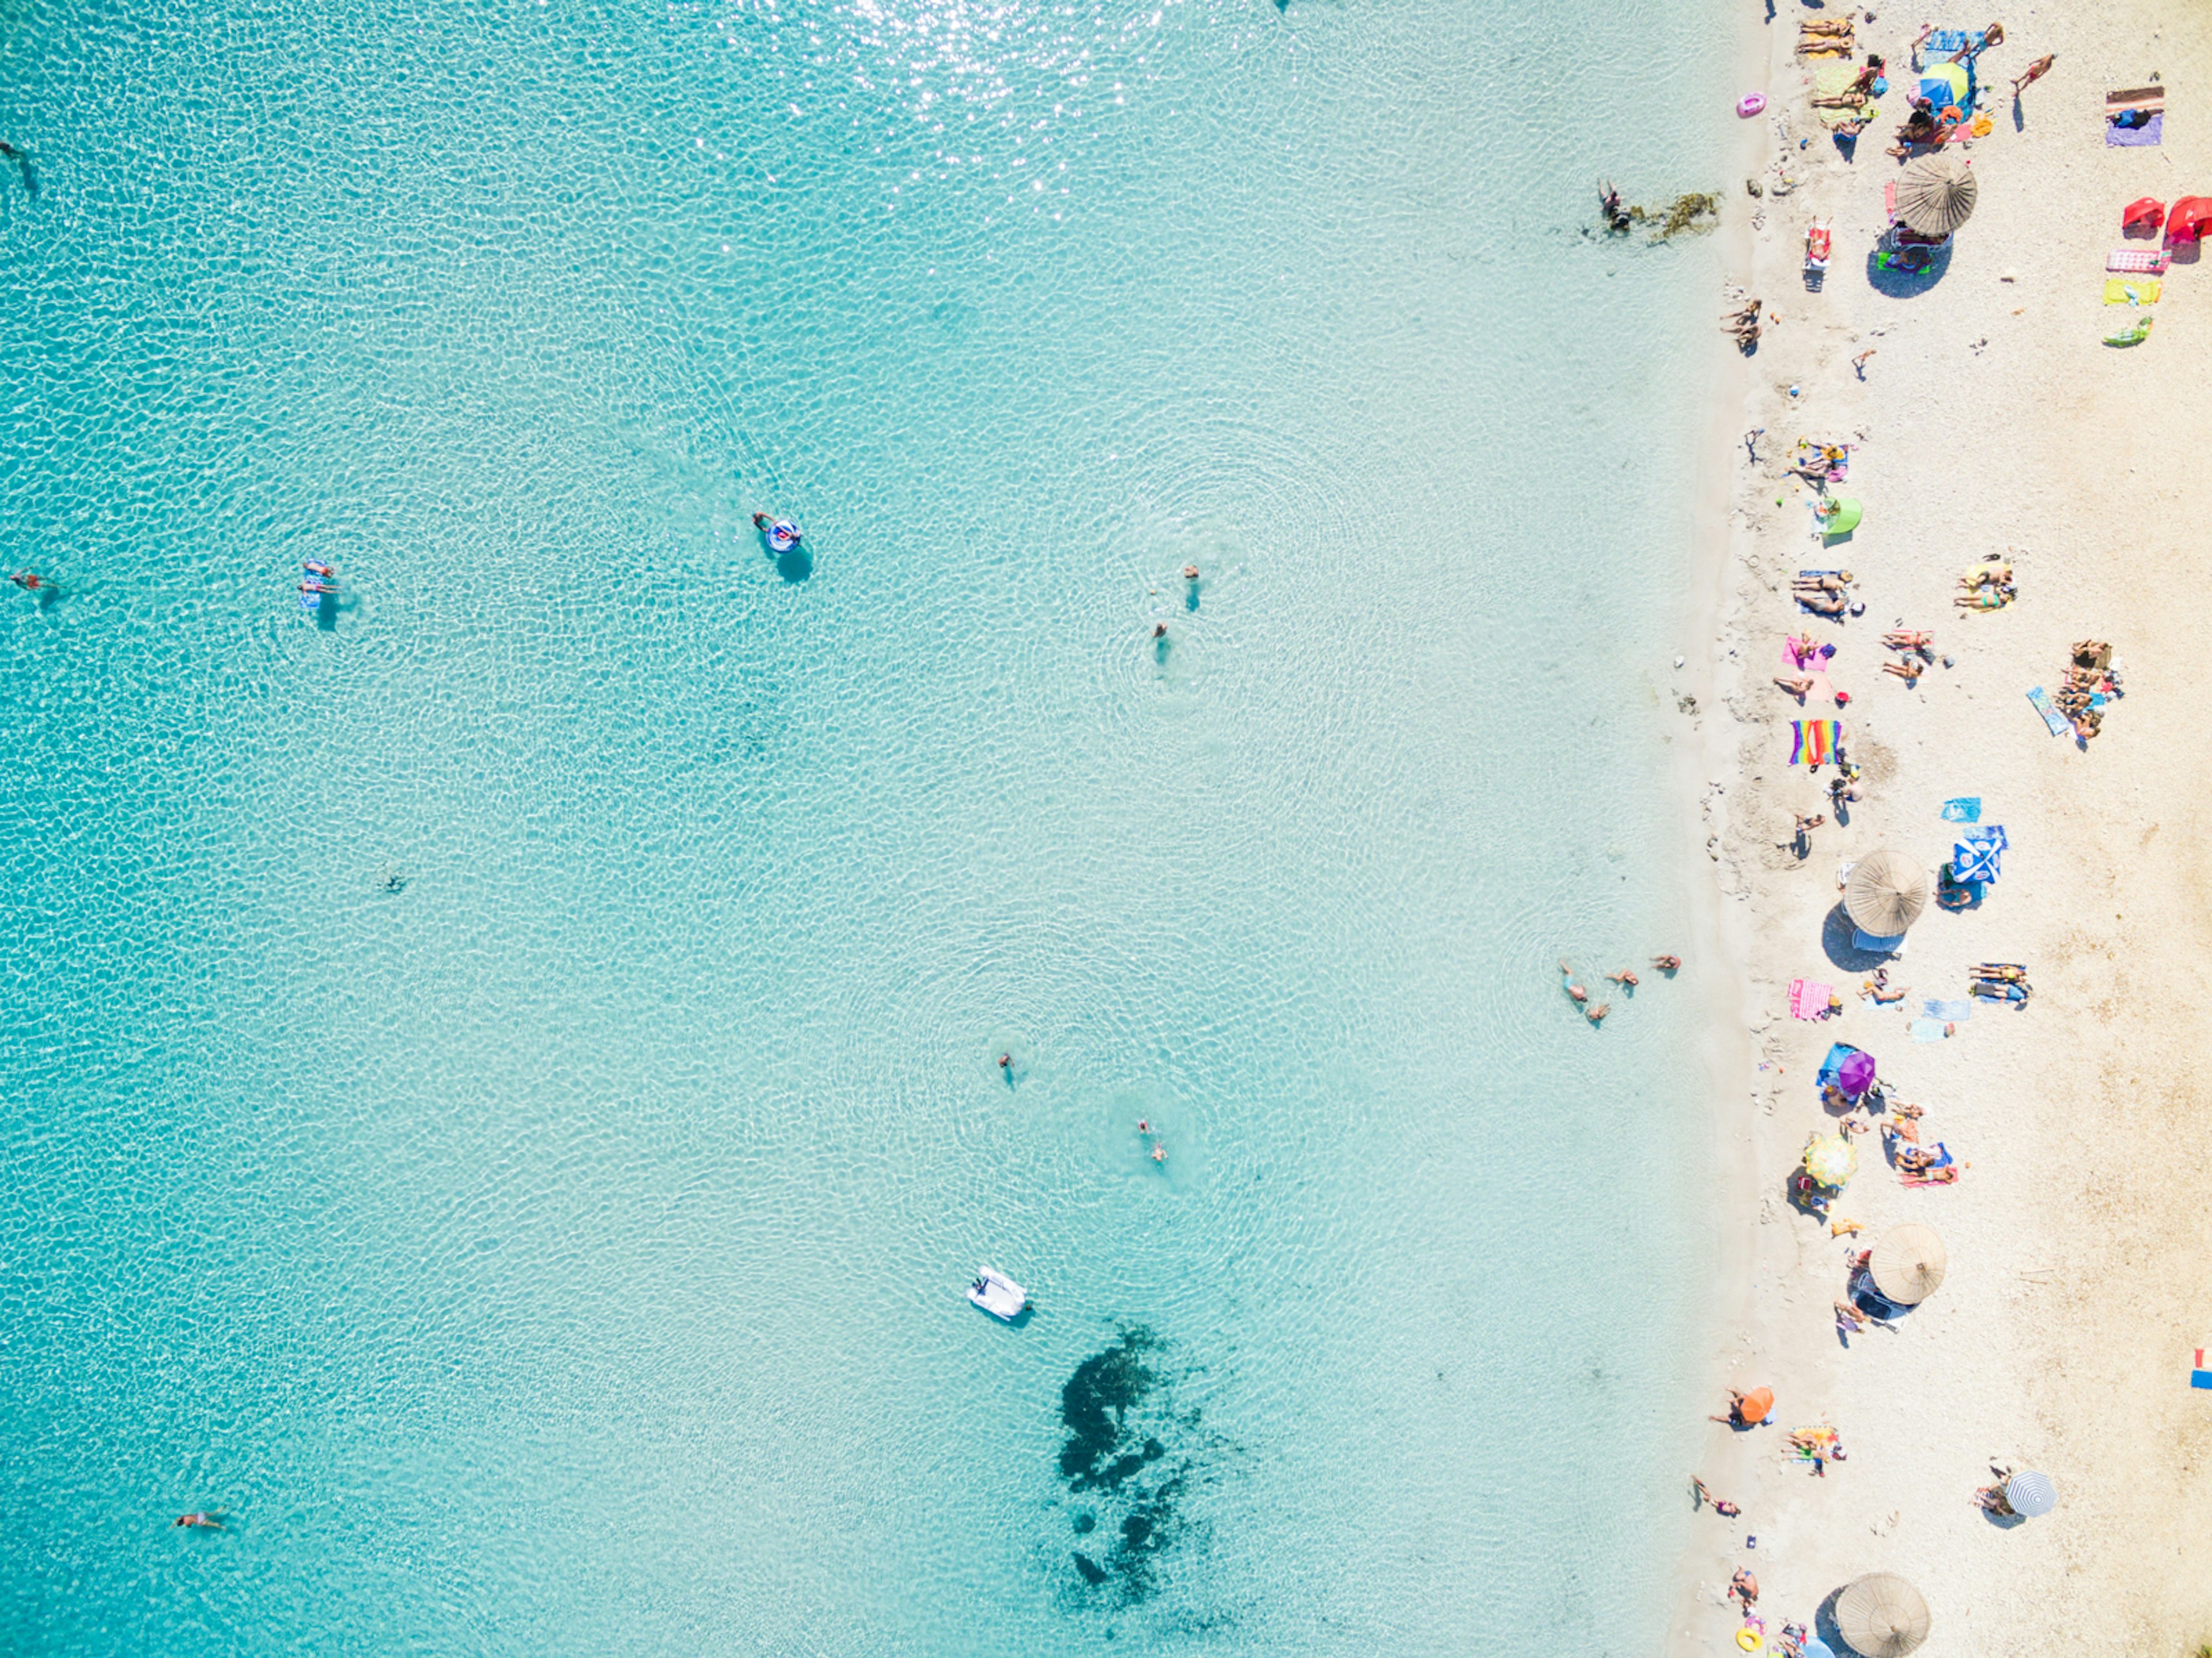 Aerial of a beach with tourists swimming in clear water and lounging on the sand.